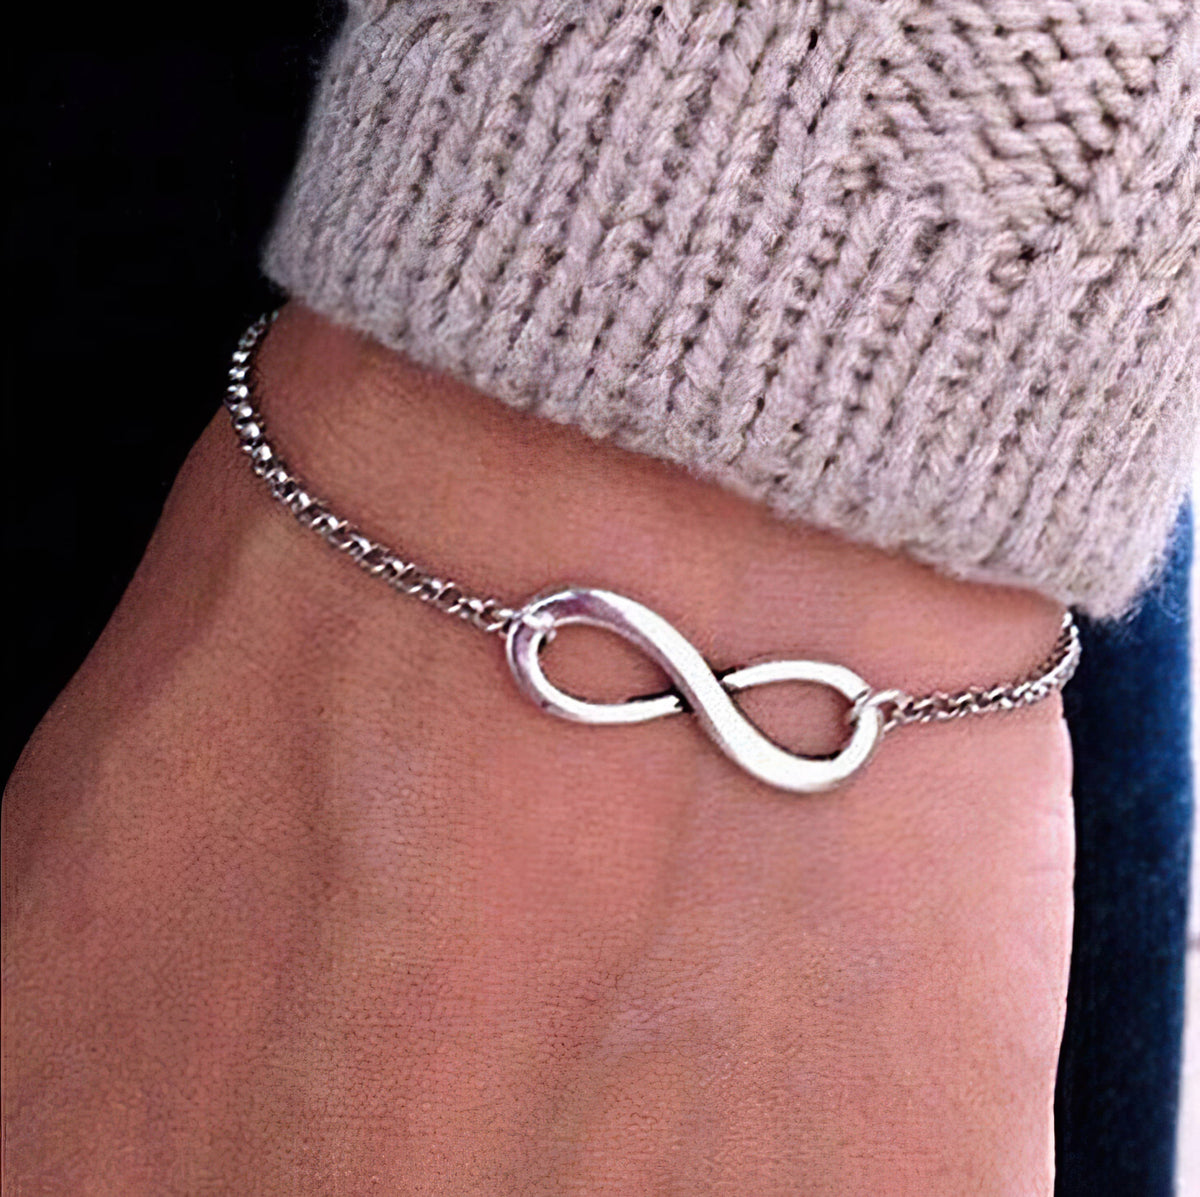 Infinity Charm Bracelet in Gold or Silver Color Free Shipping ! (4165679546462)